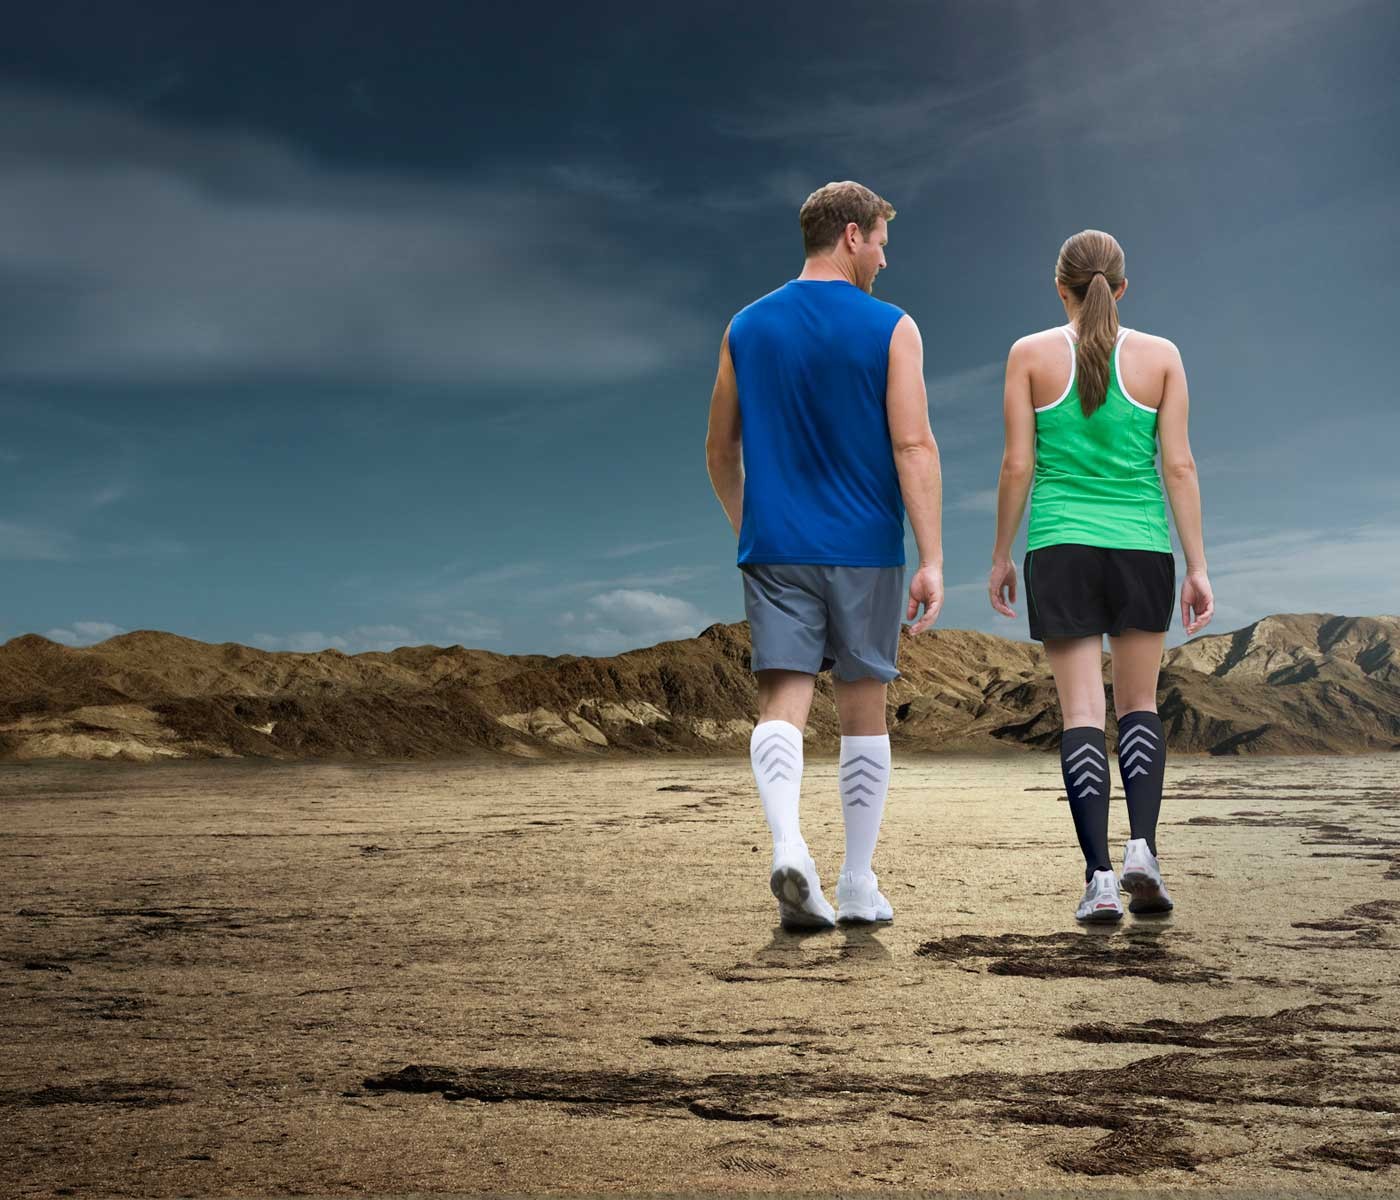 Compression socks- just how well do 